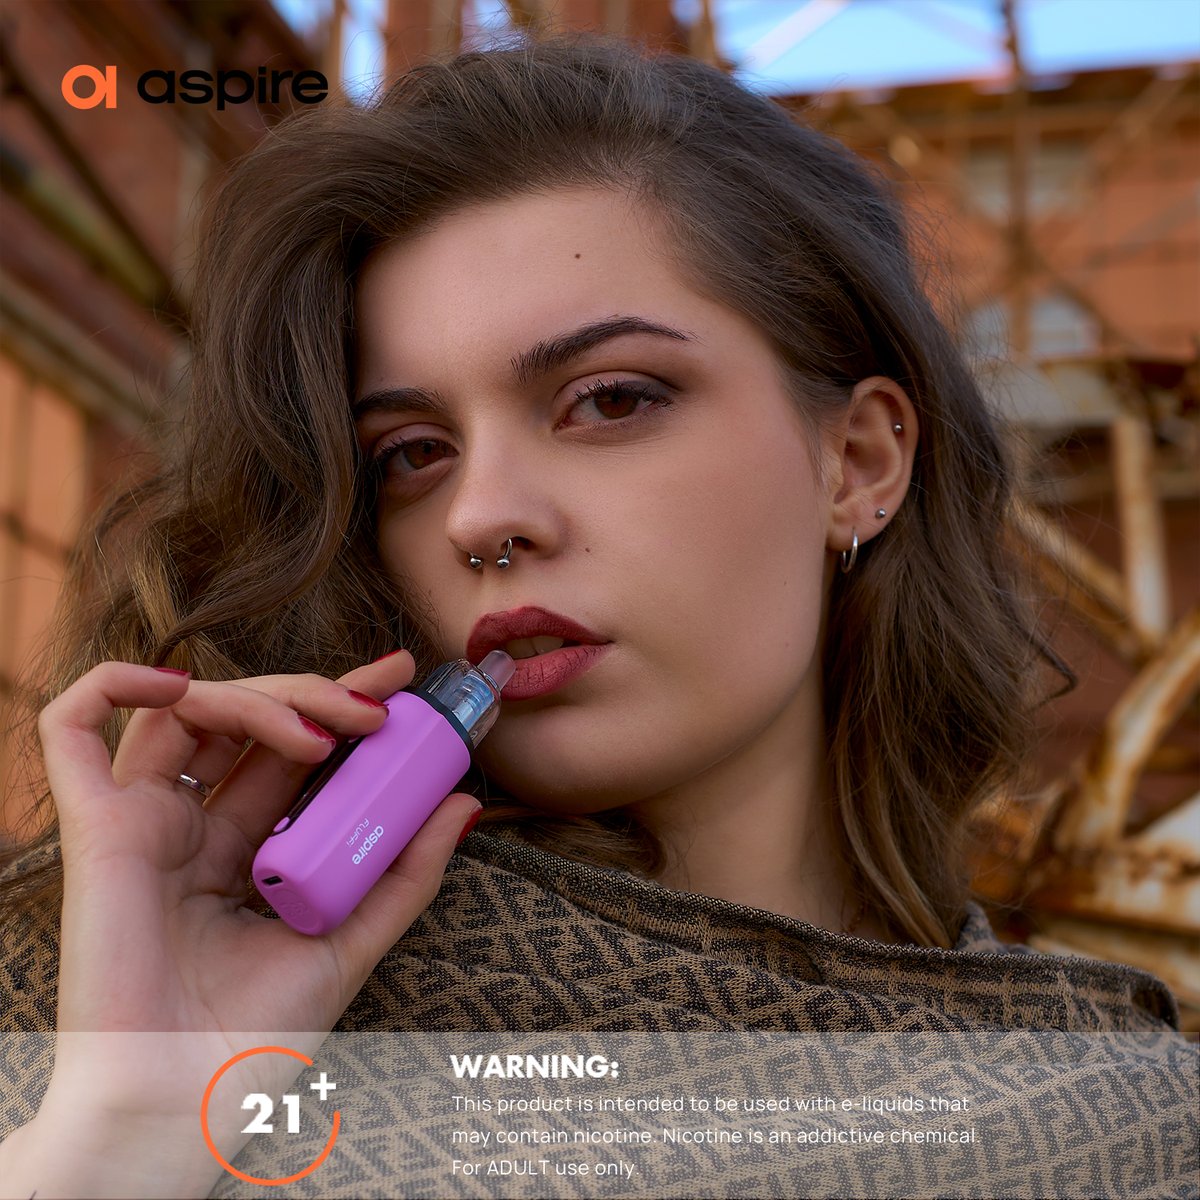 The integrated Fluffi Pod features an easy filling and pod cap design. The non-replaceable 0.6 ohm /1.0 ohm coils ensures a tailored V@ping experience for you.
#aspire #aspirecig #alwaysaspire #fluffi #aspirefluffi #podsystem
WARNING: For 21+ adults use only!